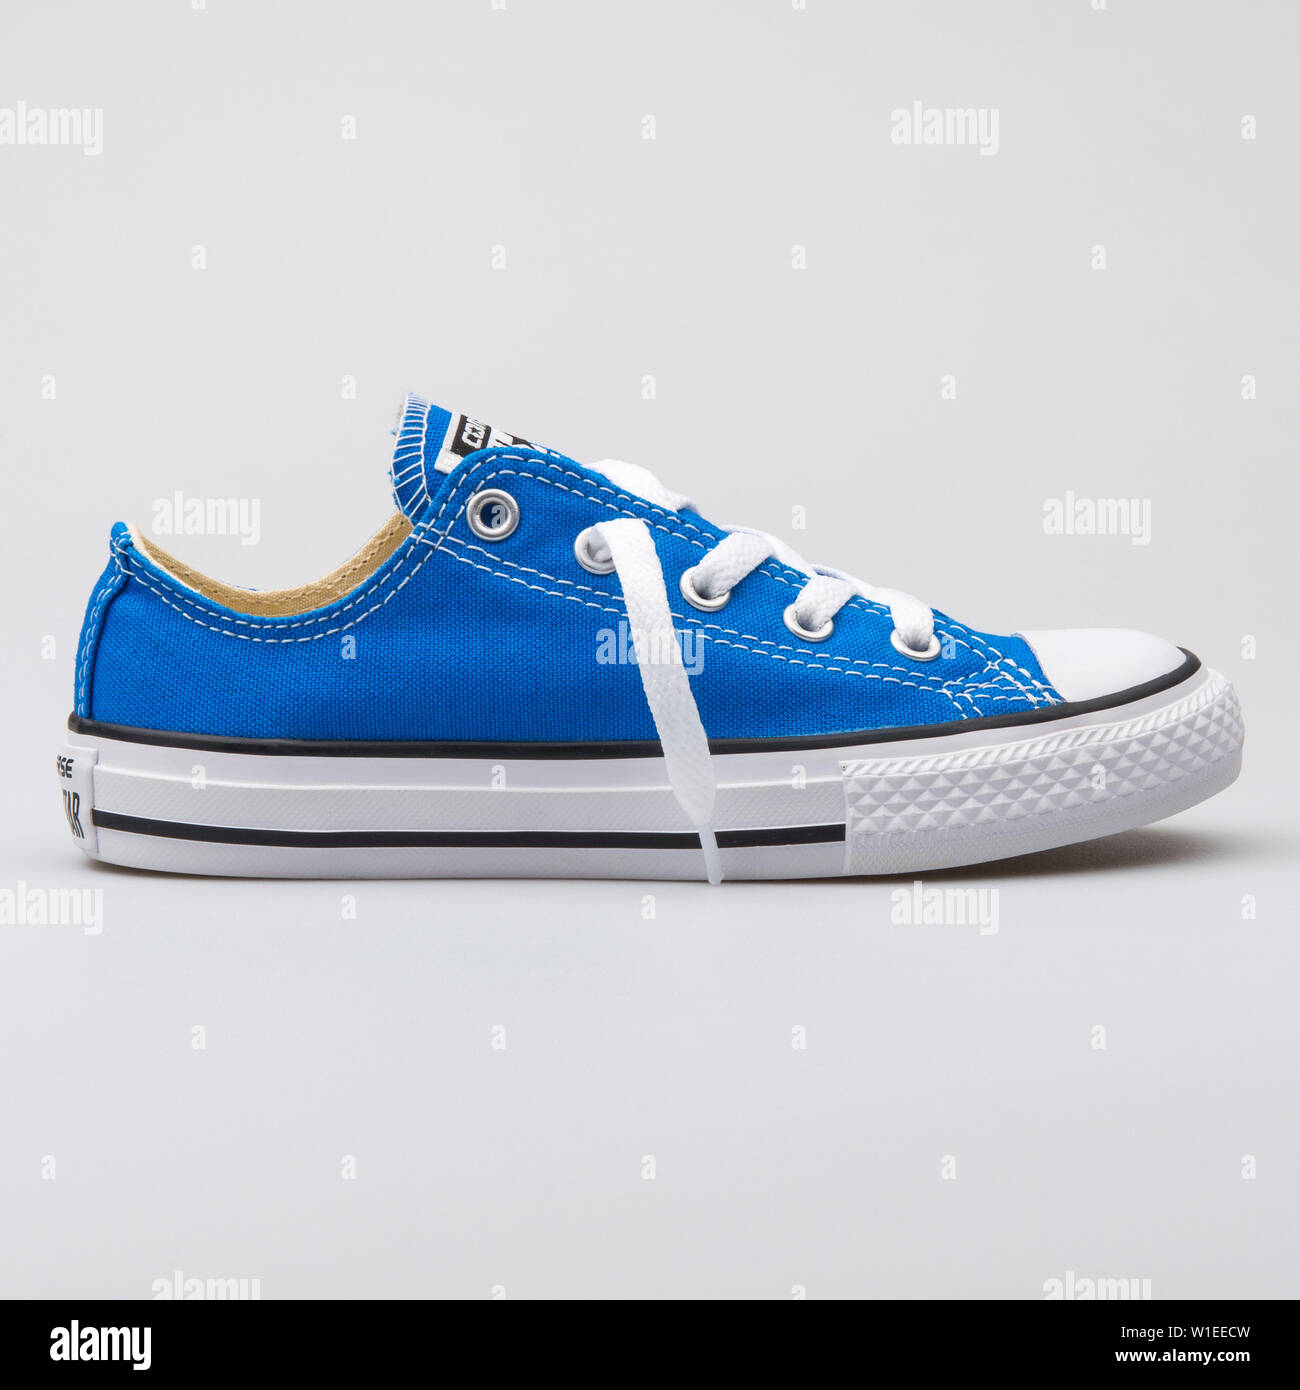 VIENNA, AUSTRIA - AUGUST 7, 2017: Converse Chuck Taylor All Star OX SOAR  blue sneaker on white background Stock Photo - Alamy